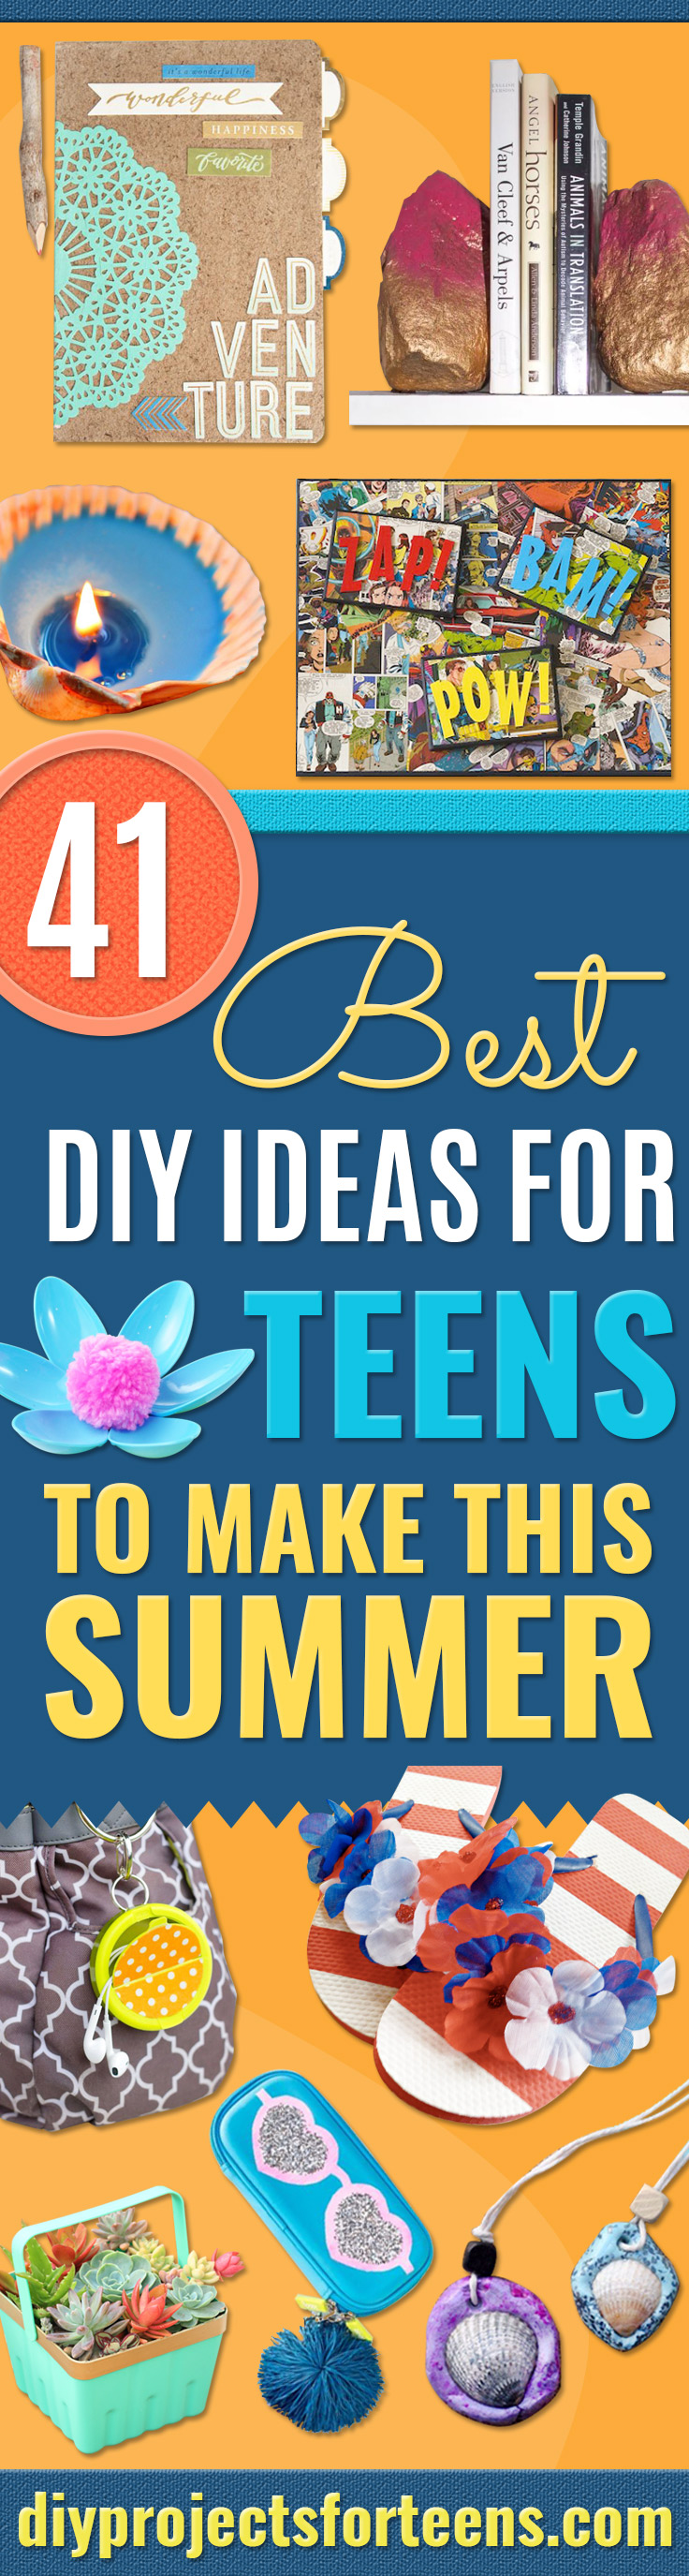 Best DIY Ideas for Teens To Make This Summer - Fun and Easy Crafts, Room Decor, Toys and Craft Projects to Make And Sell - Cool Gifts for Friends, Awesome Things To Do When You Are Bored - Teenagers - Boys and Girls Love Making These Creative Projects With Step by Step Tutorials and Instructions #diyideas #summer #teencrafts #crafts